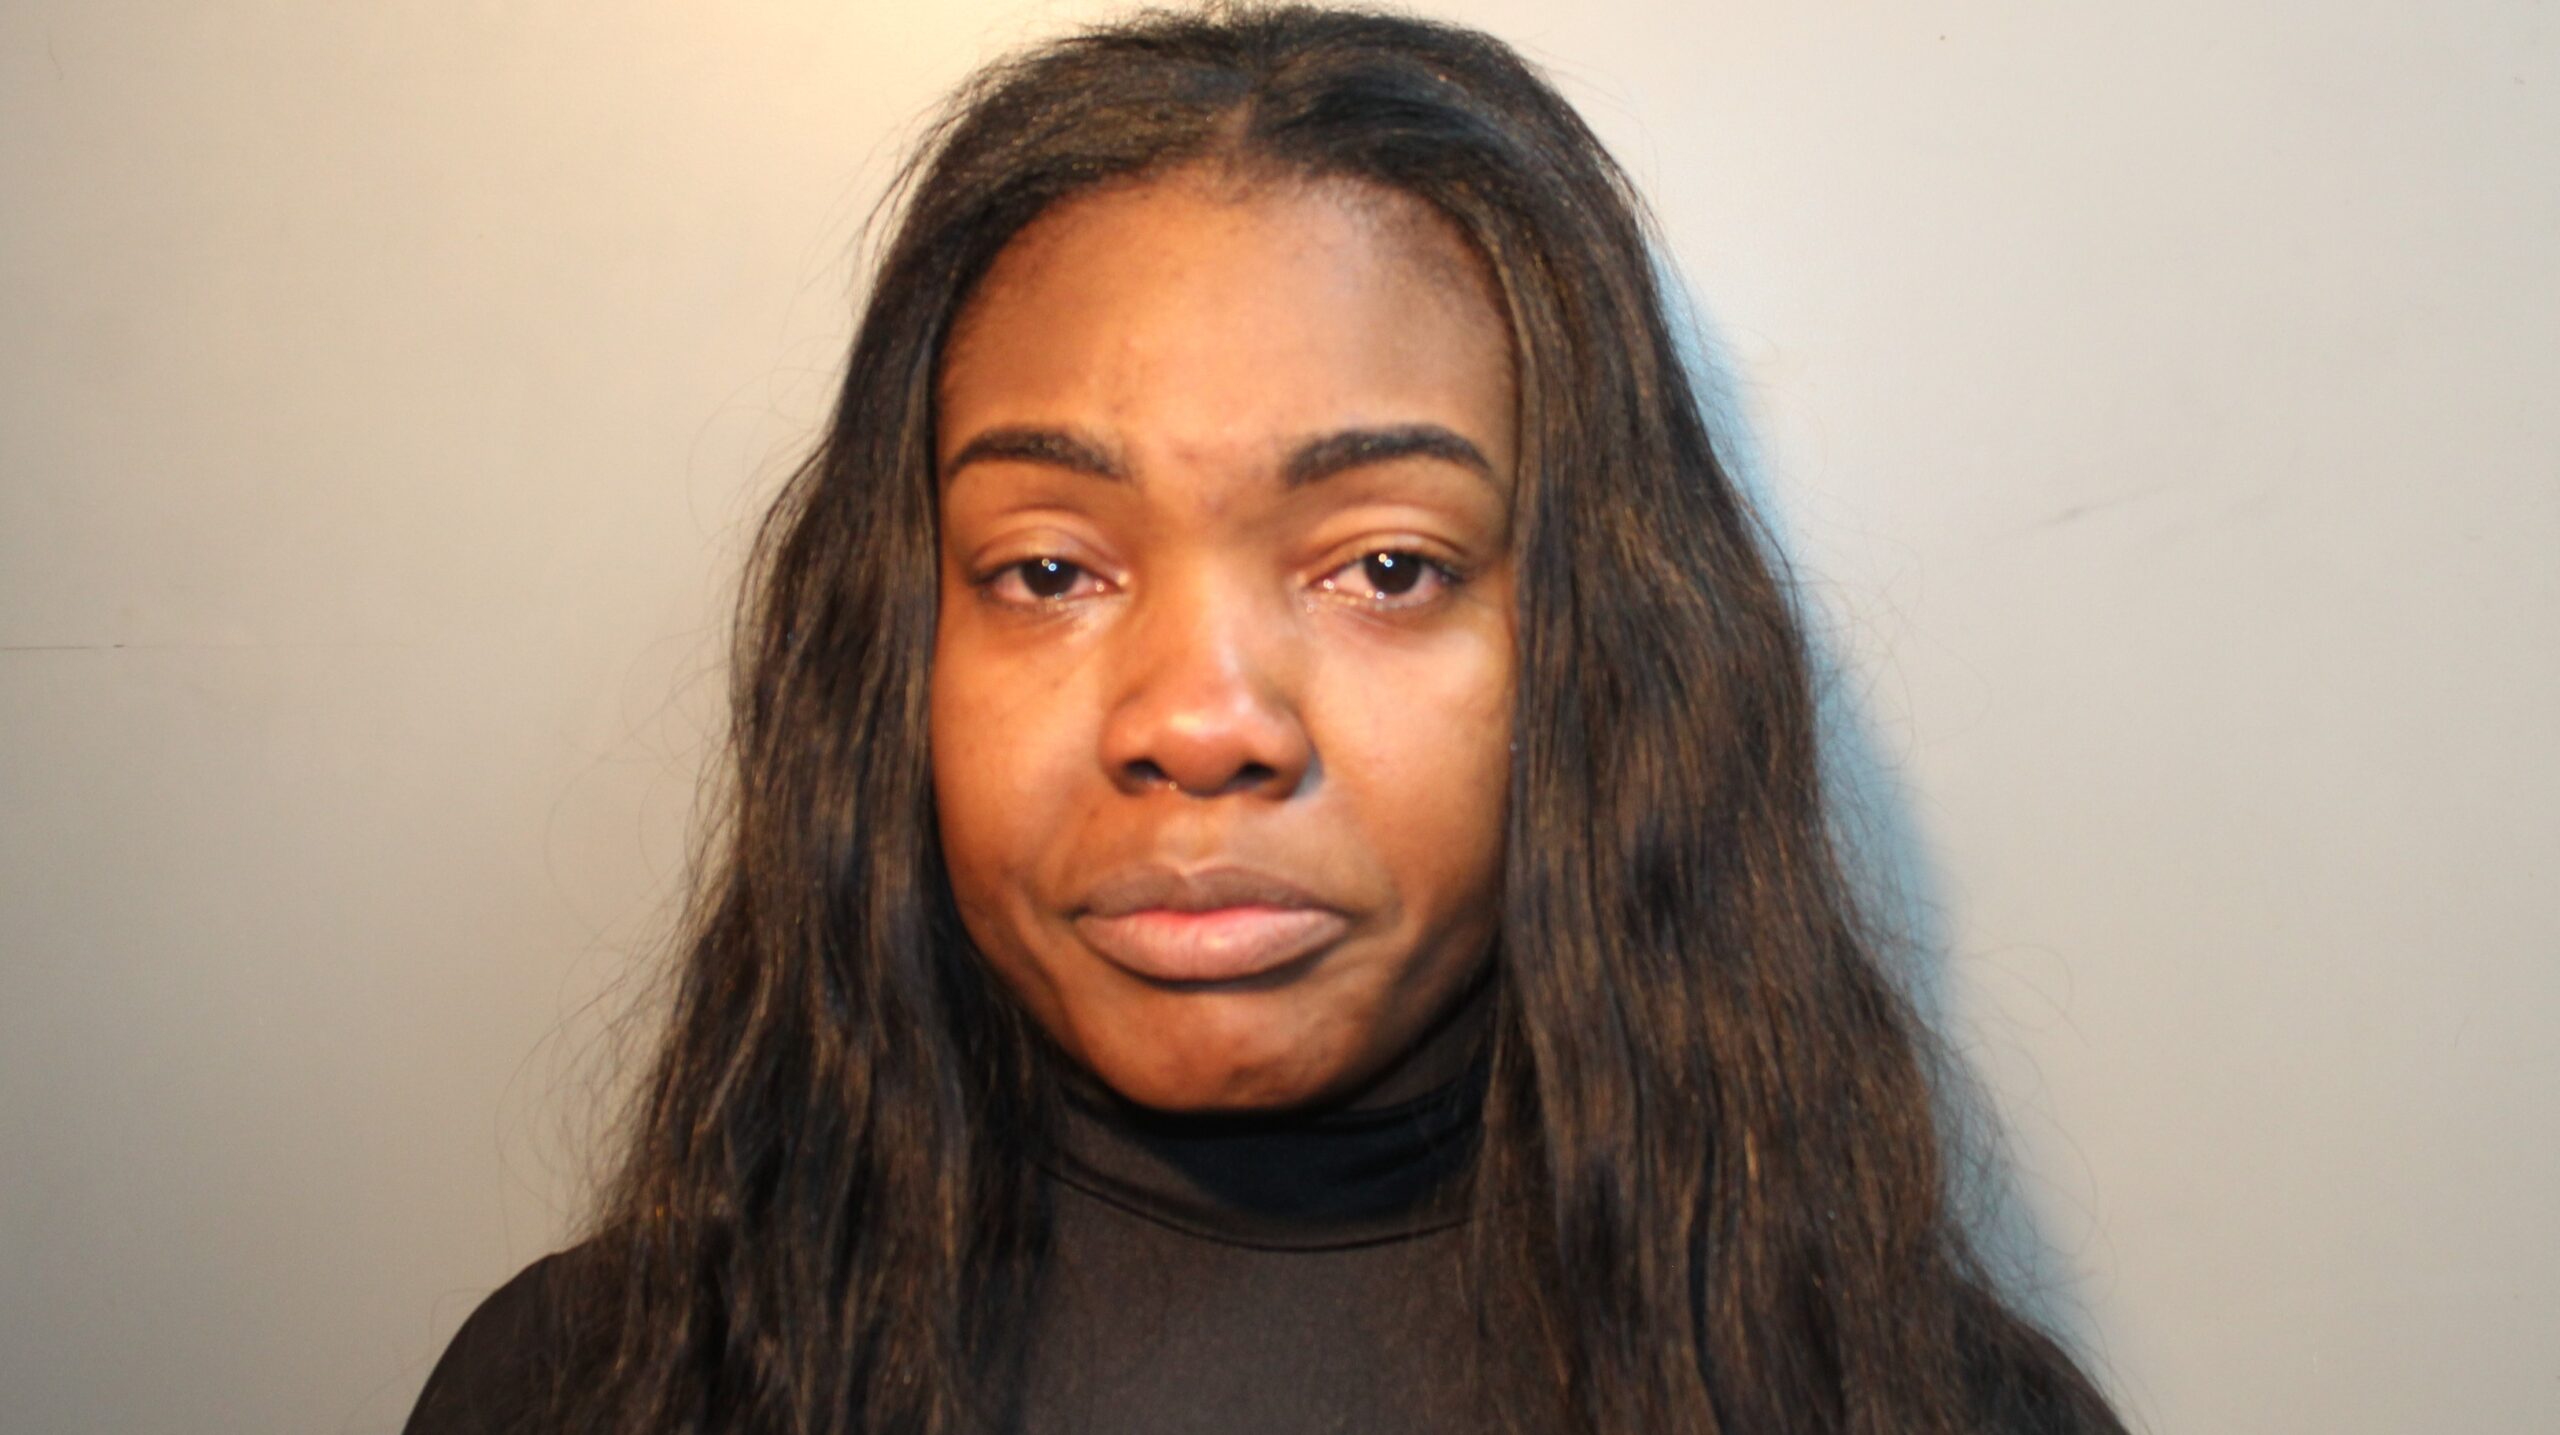 Peter's Rest Woman Charged With Child Neglect After Relative Picks Up Unattended Child In Car